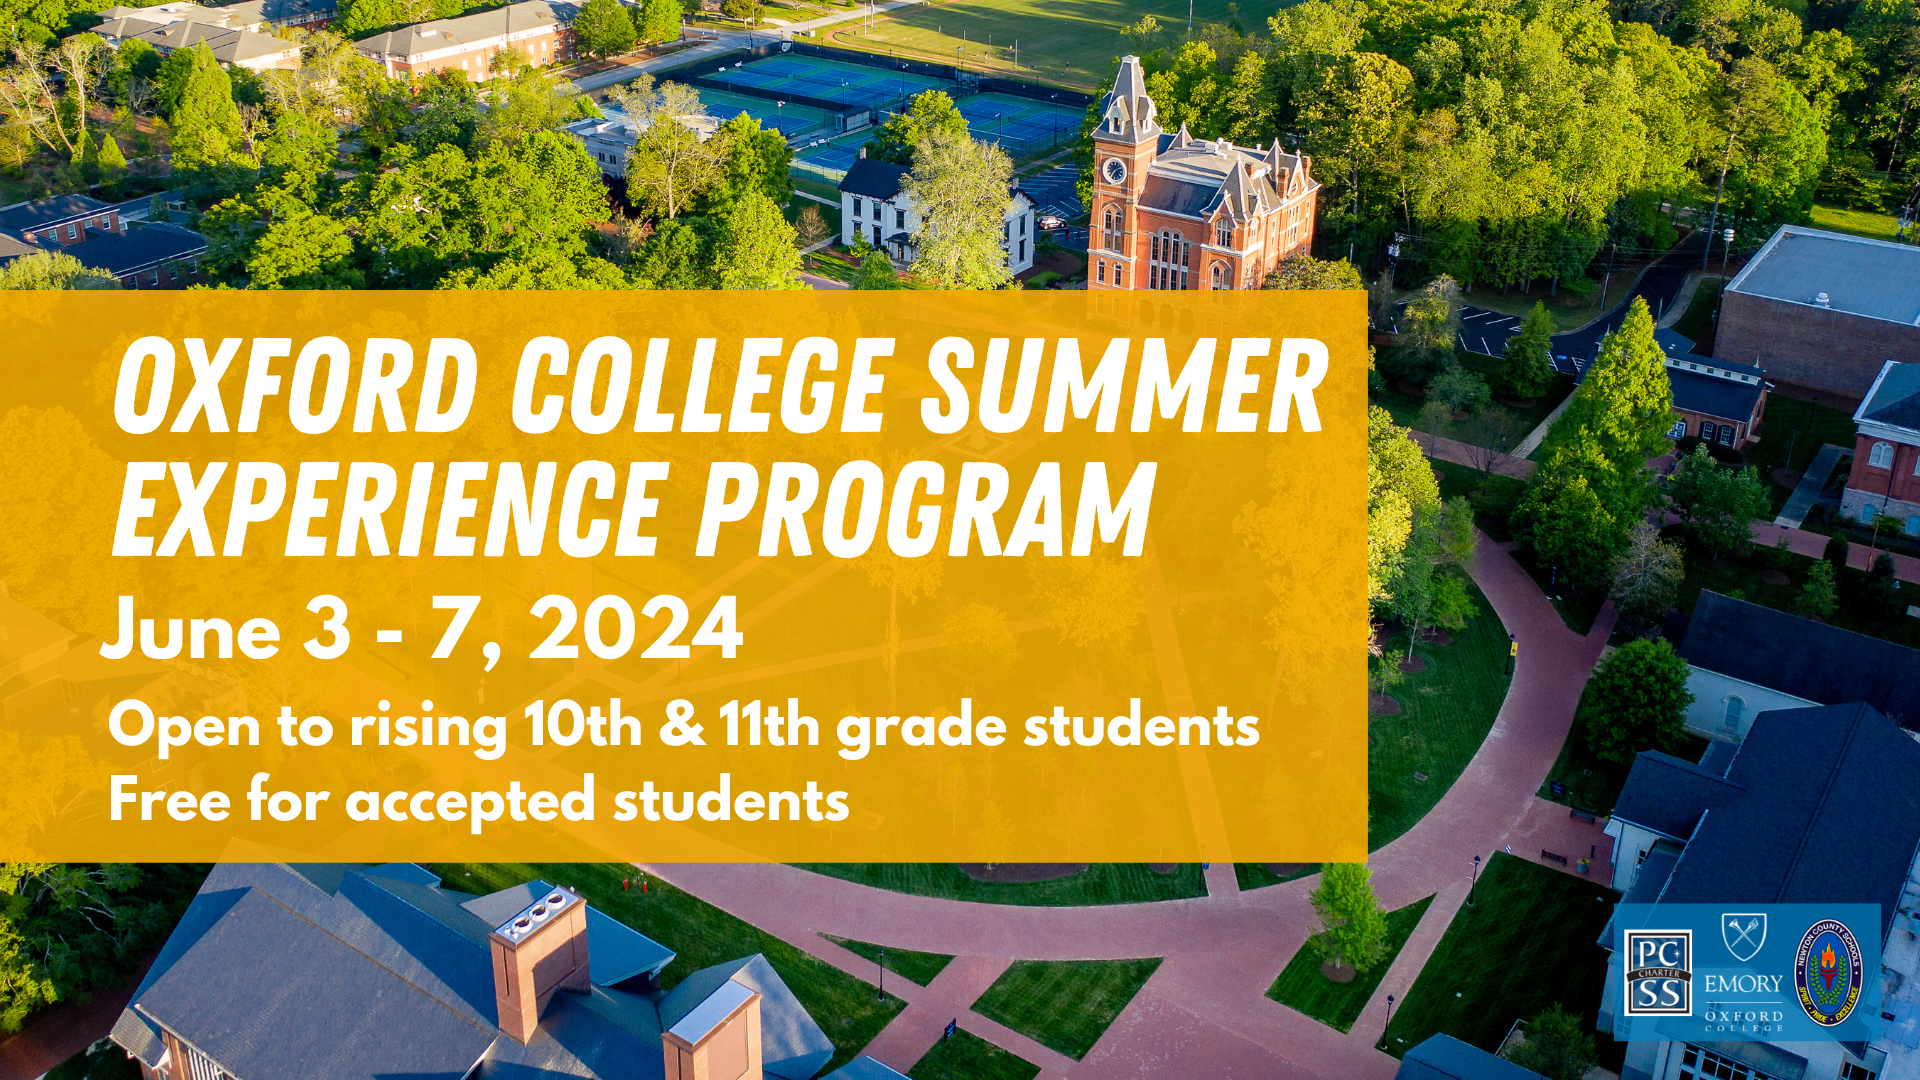 Oxford College Summer Program Experience